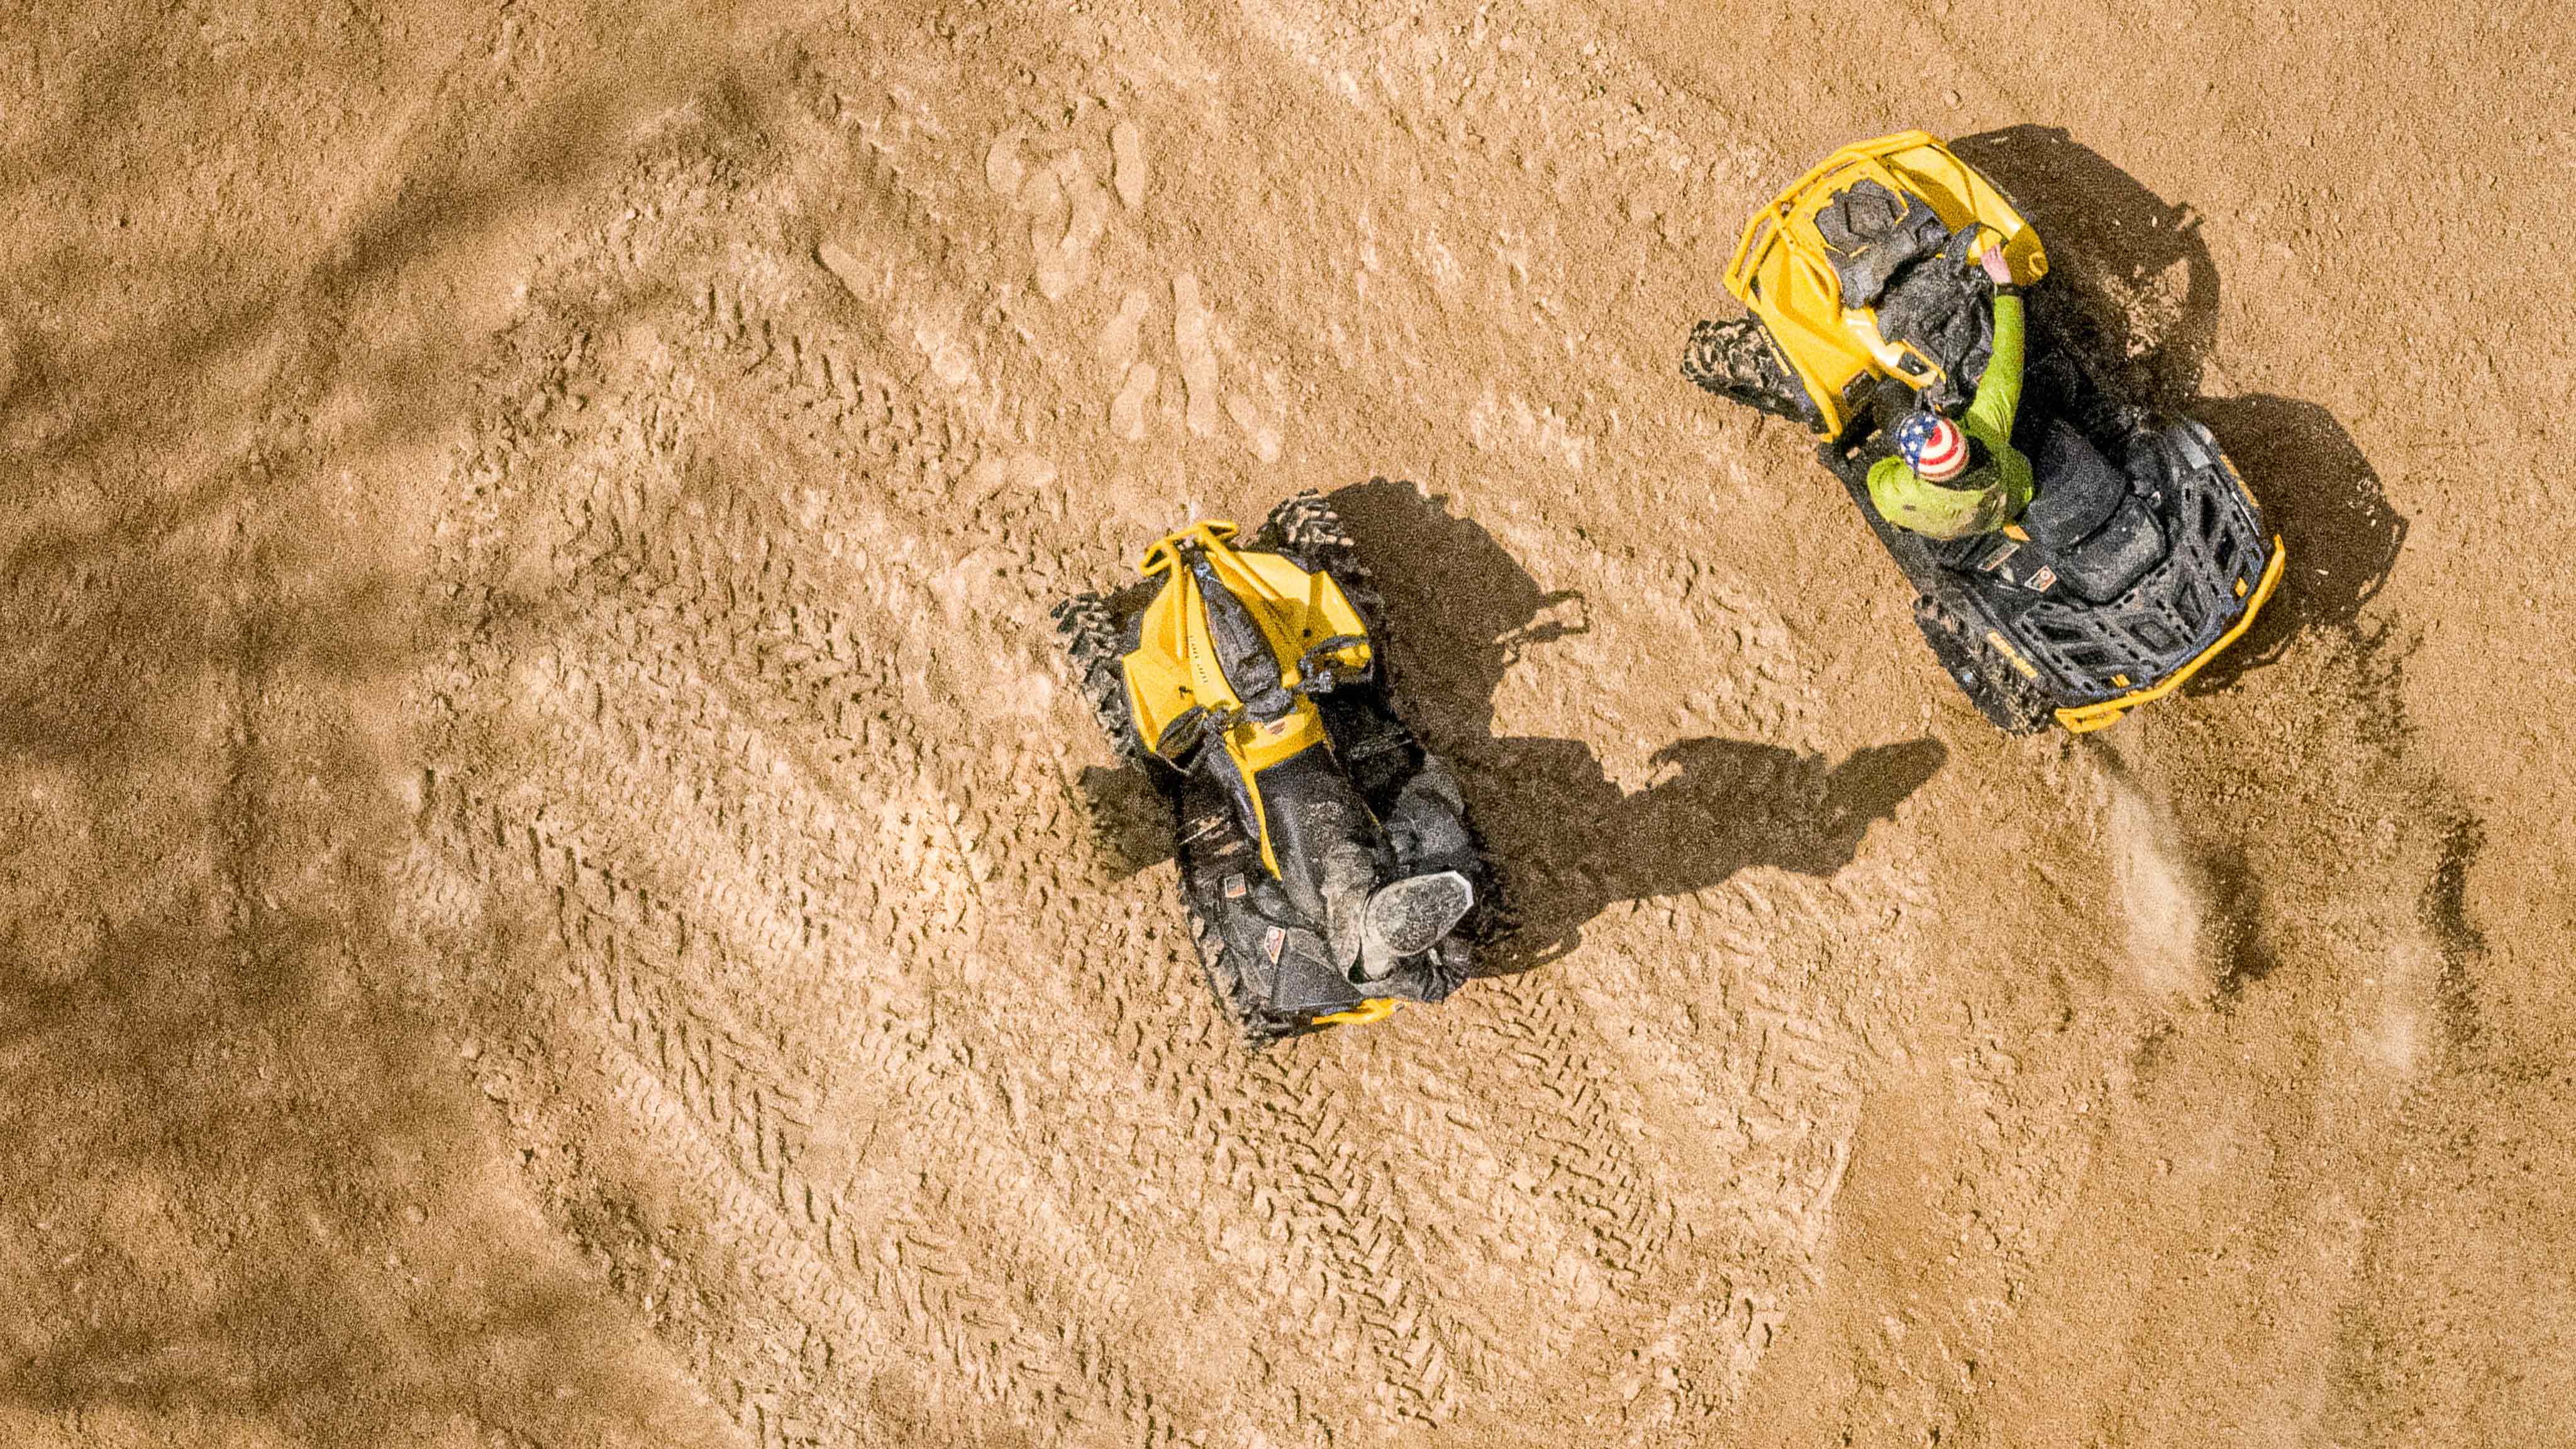 Top view of 2 Can-Am Off-Road ATVs